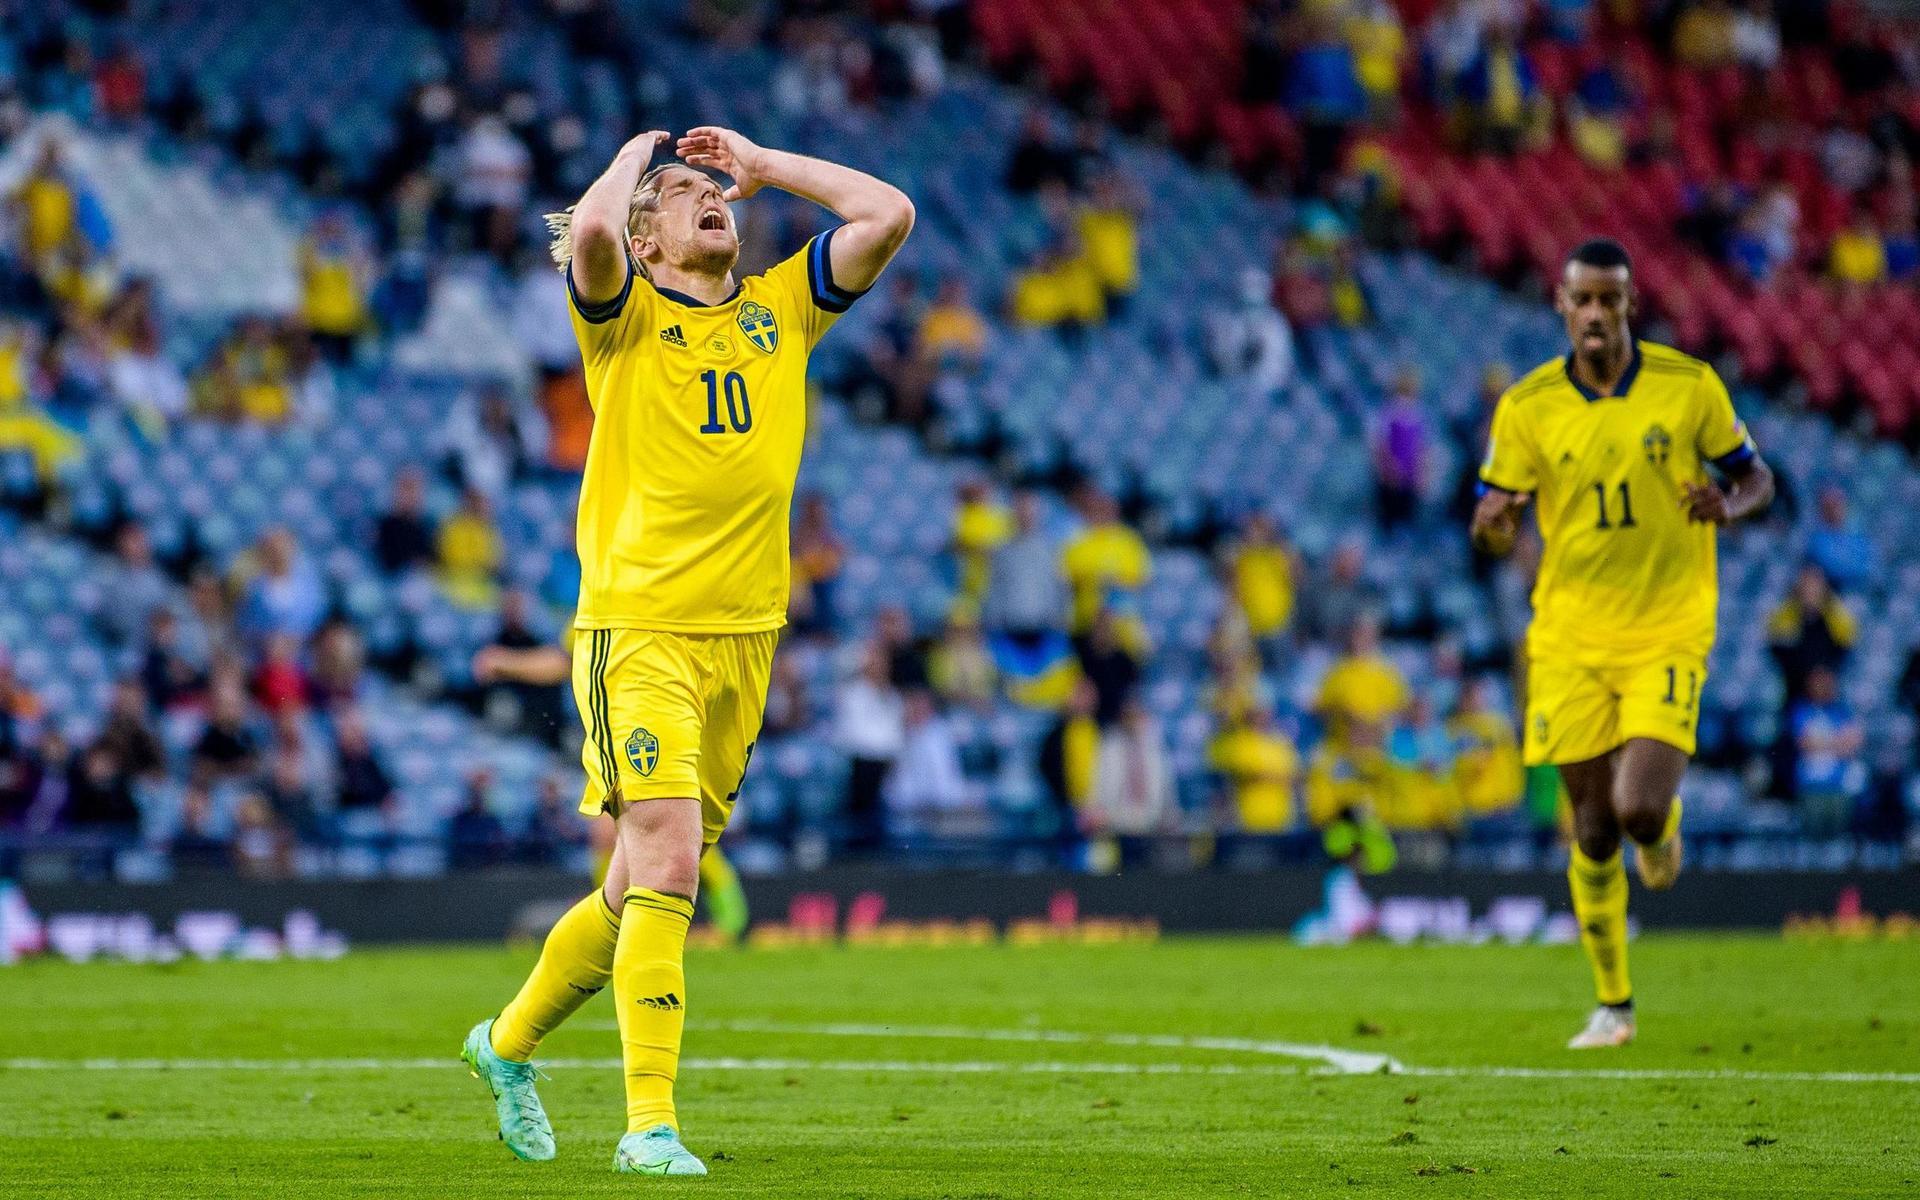 Emil Forsberg of Sweden looks dejected during the UEFA Euro 2020 Football Championship round of 16 match between Sweden and Ukraina on June 29, 2021 in Glasgow.